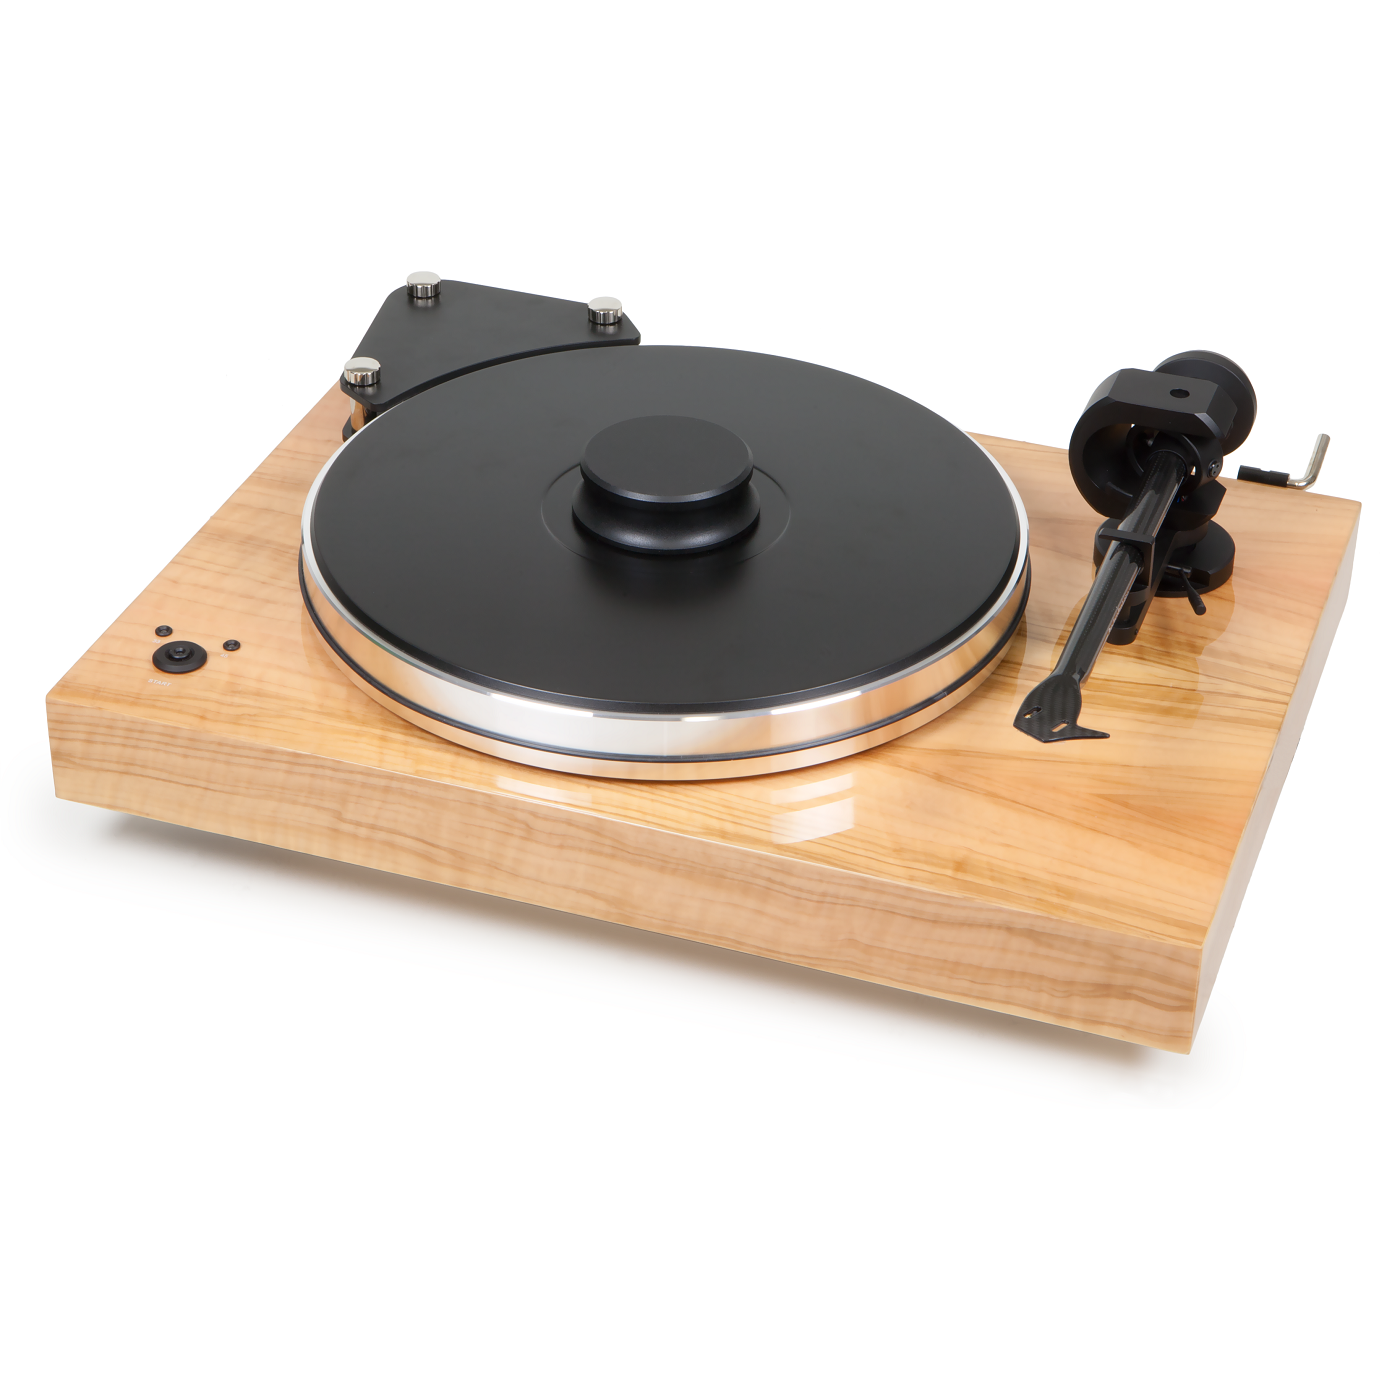 Pro-Ject Xtension 9 SuperPack Turntable